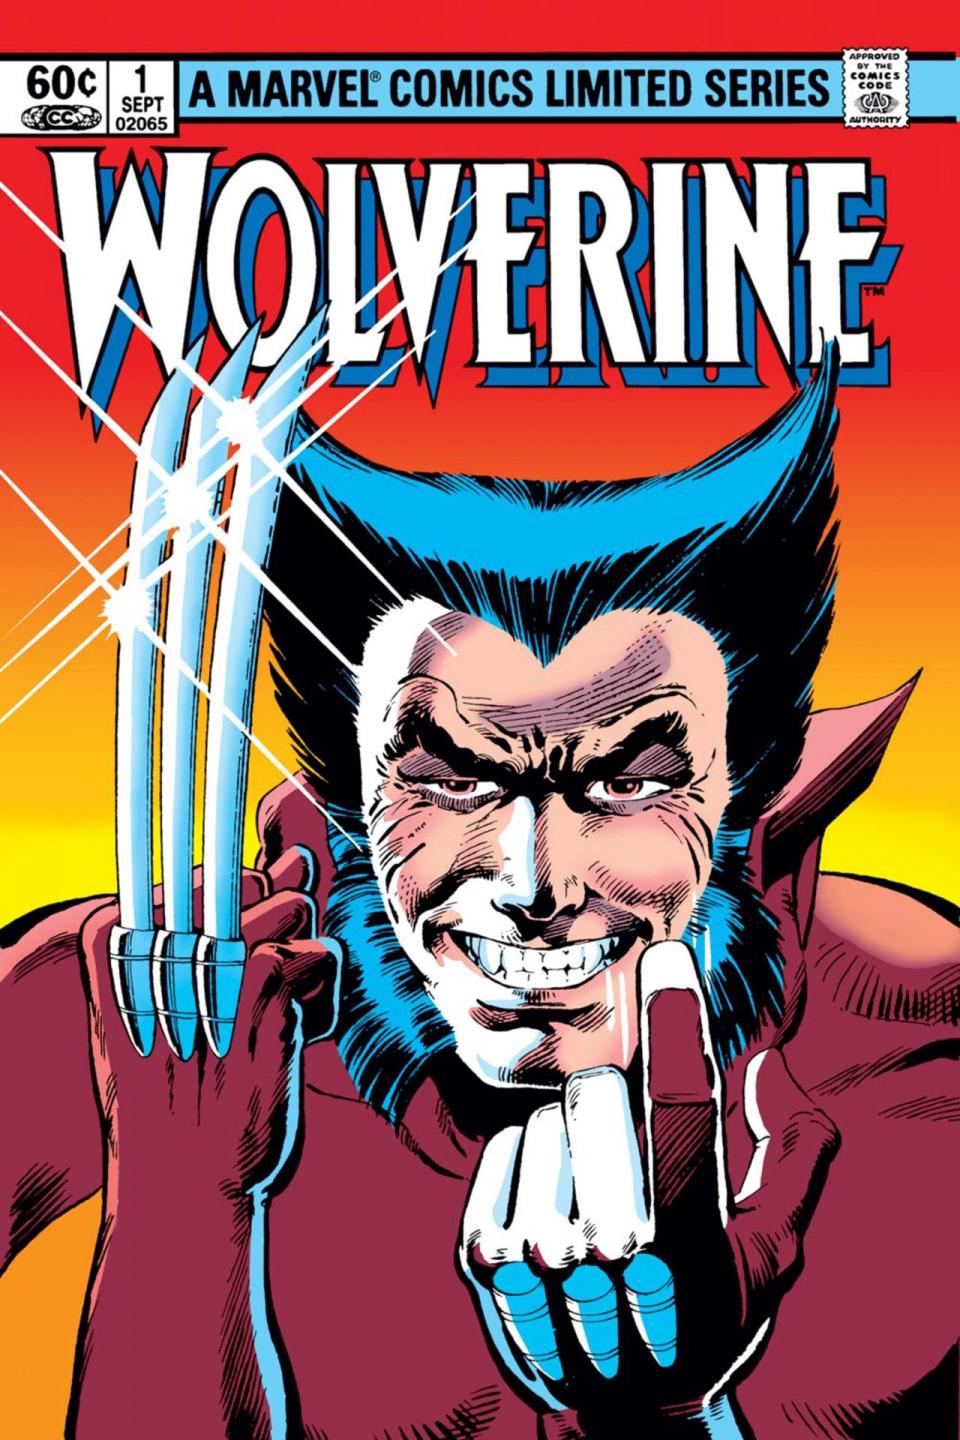 The cover for the Wolverine mini series from 1982 shows Wolverine in close up smiling at the reader with his large claws sitting next to his face